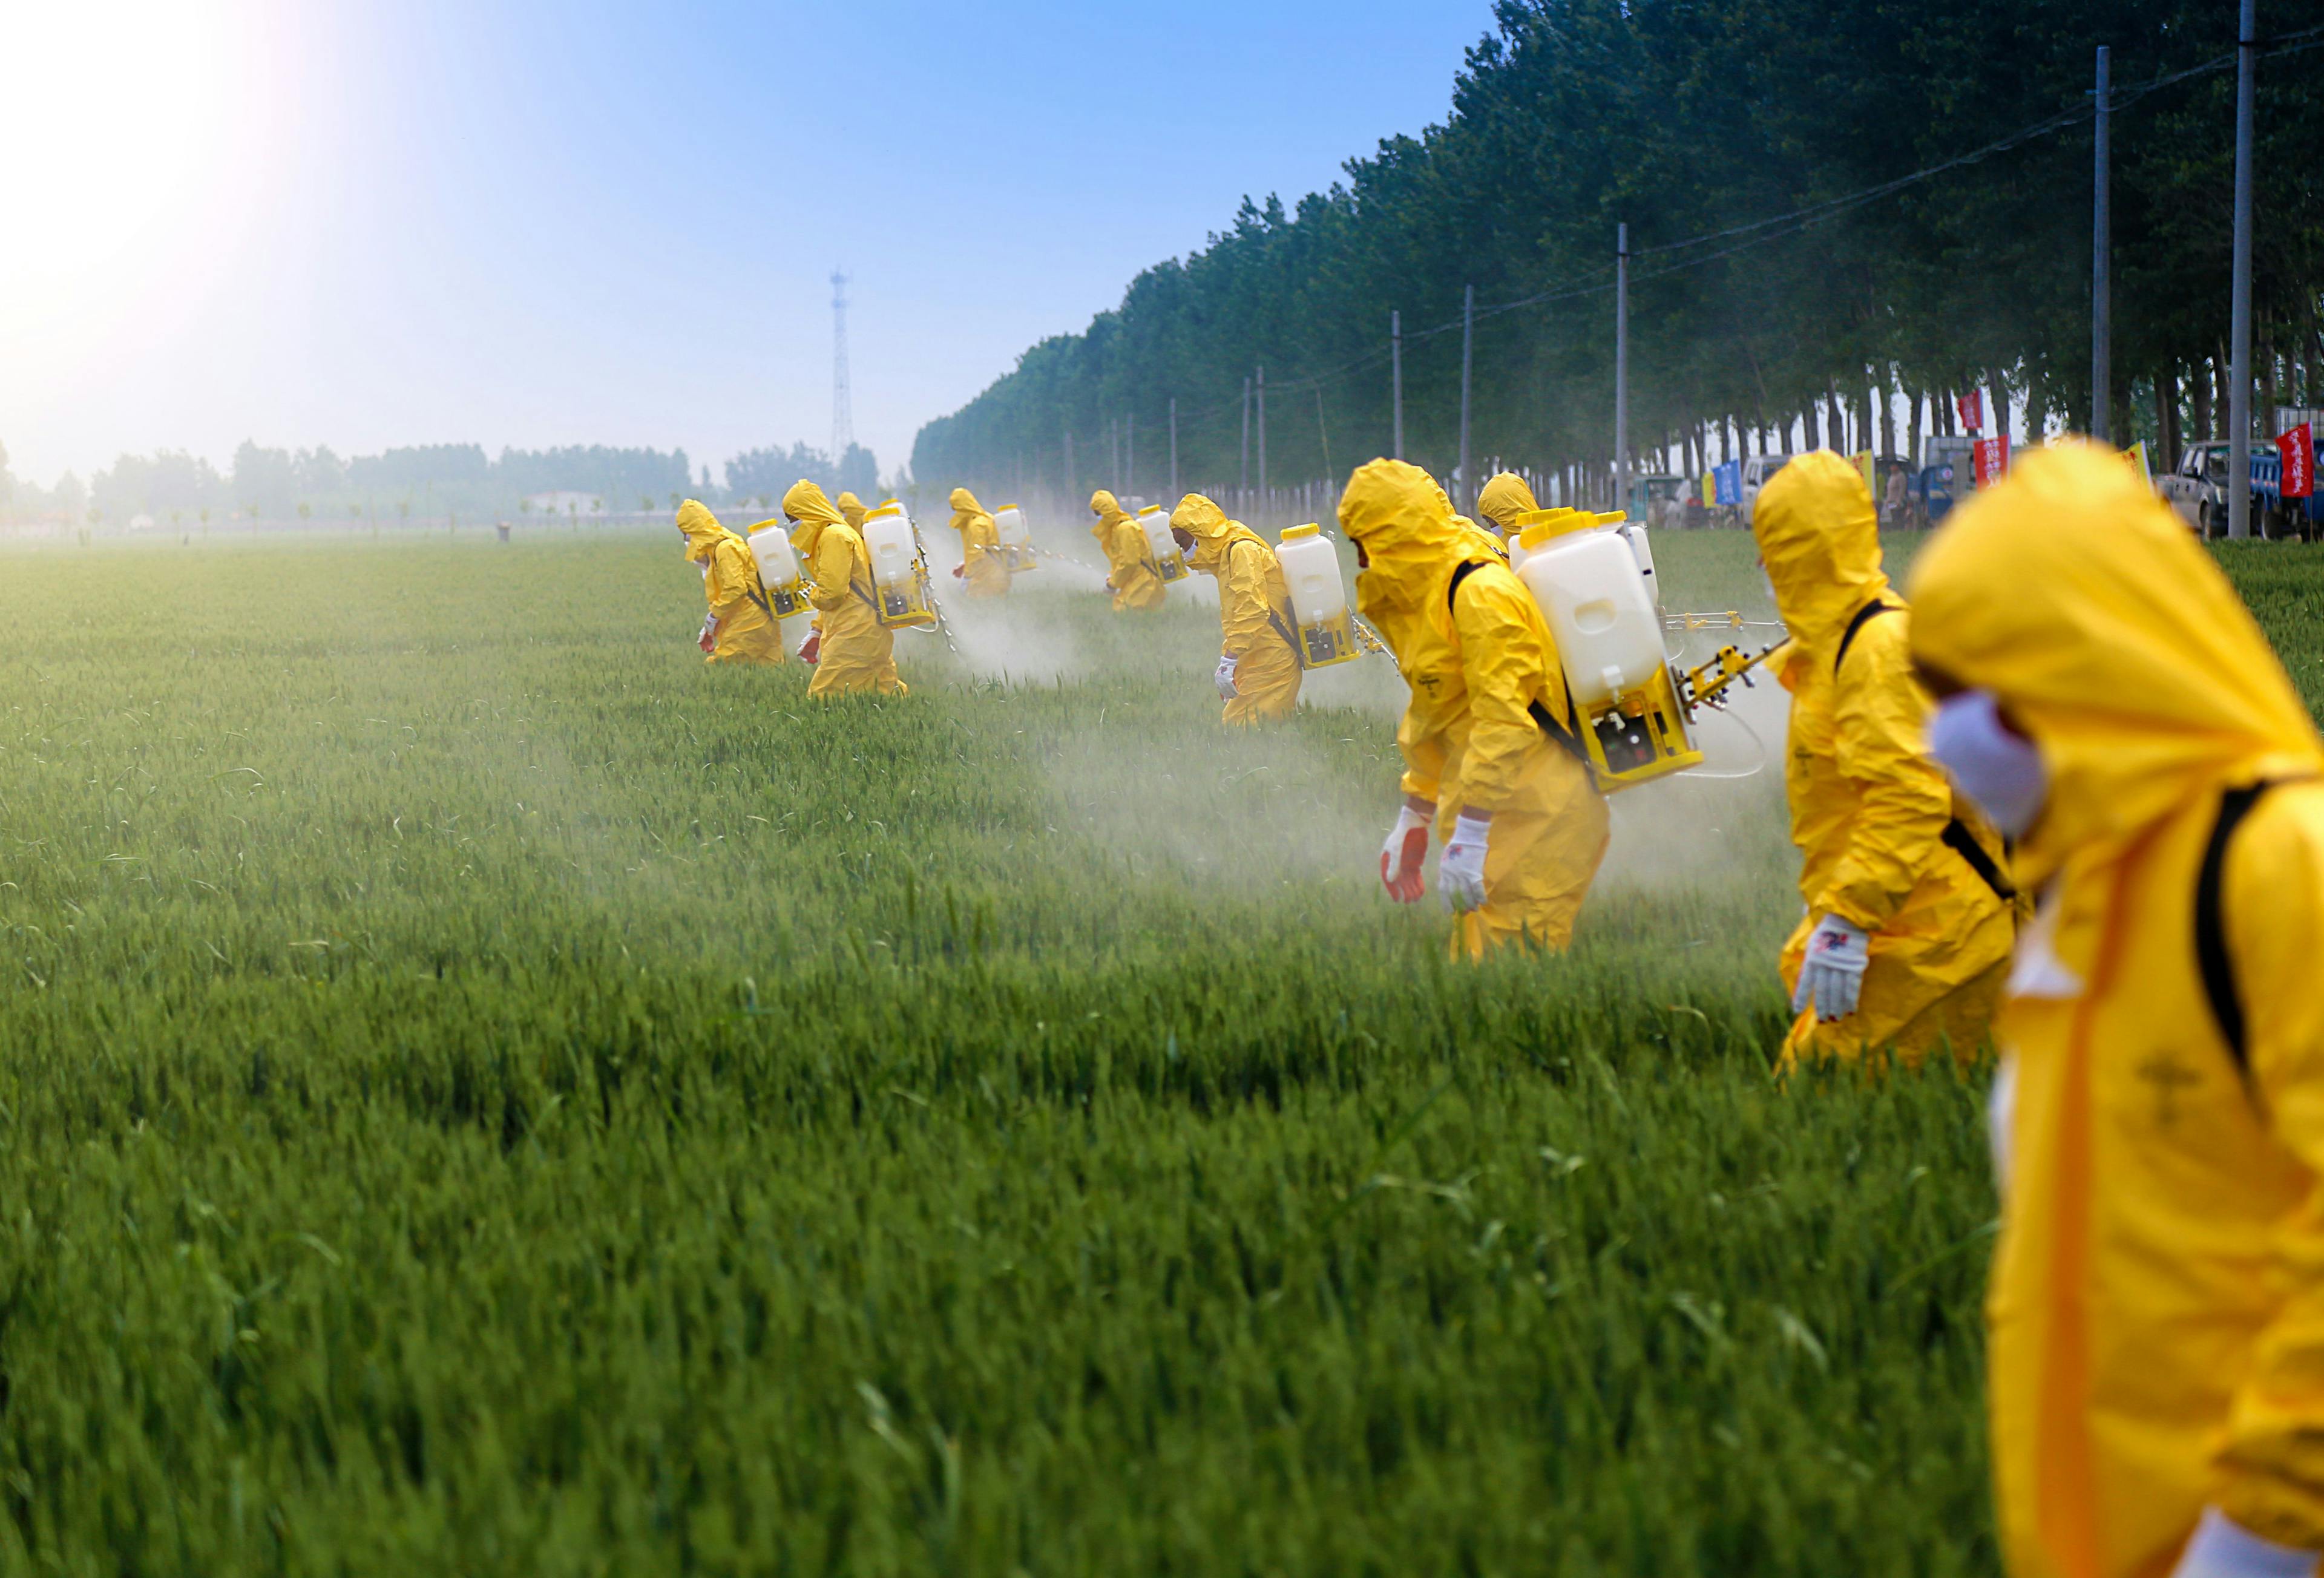 Farmers sprying pesticide in wheat field wearing protective clothing | Image Credit: ©